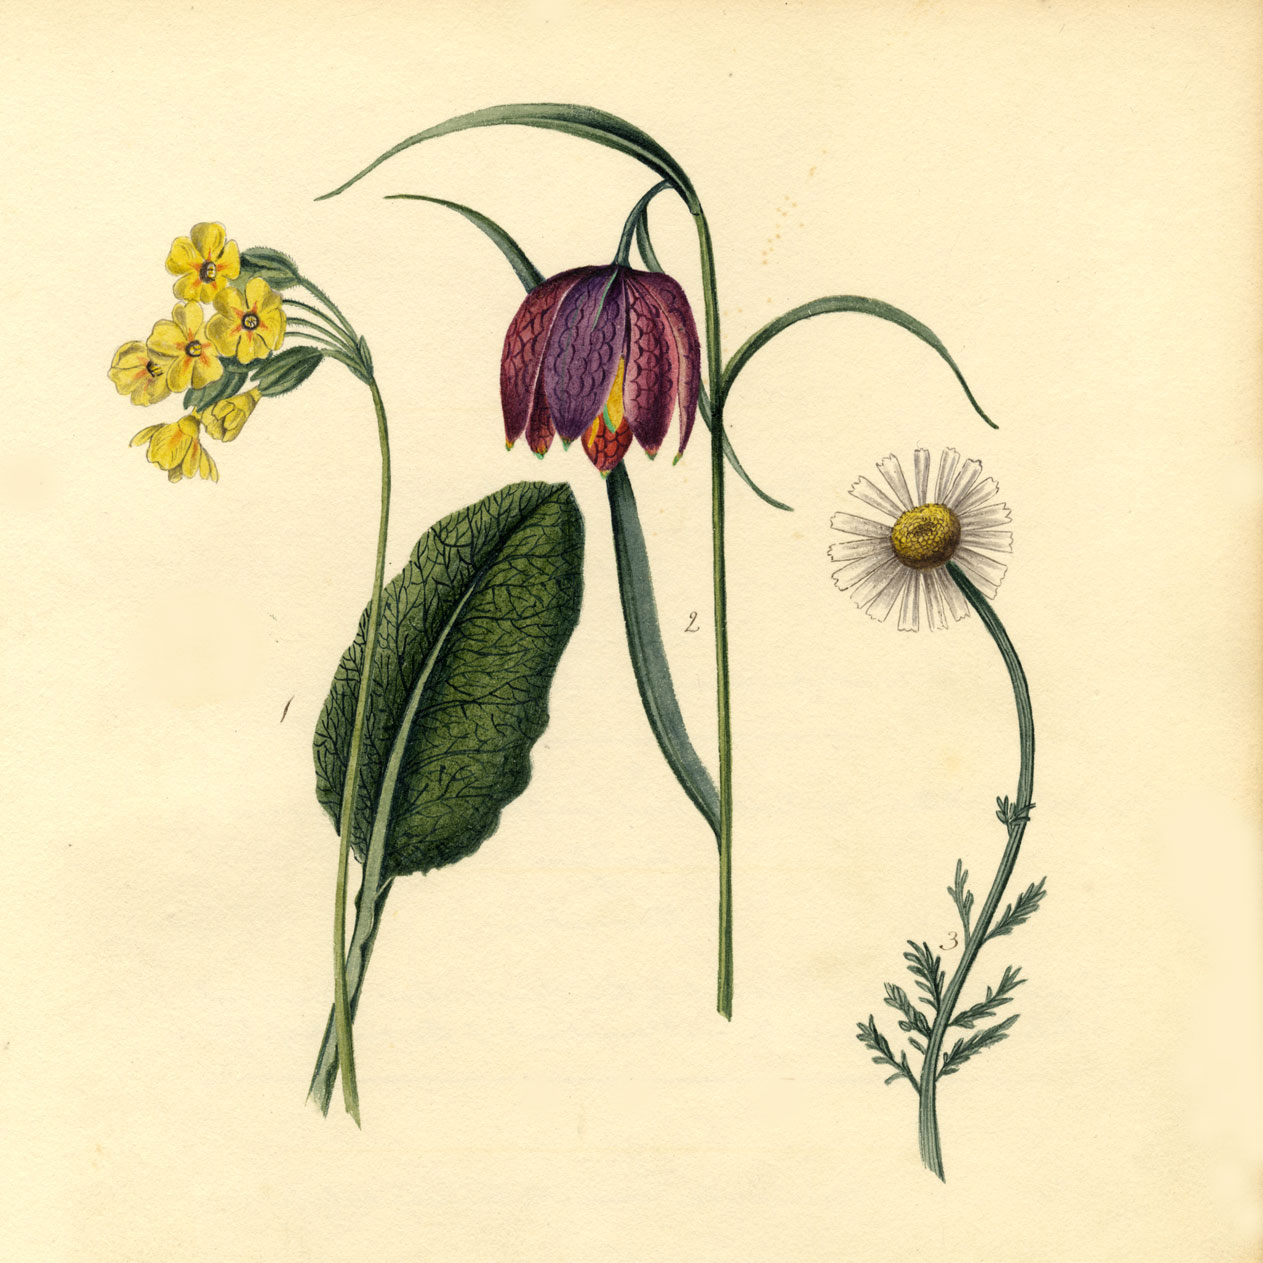 Field Flowers & Floriography: 1830s Botanical Watercolours